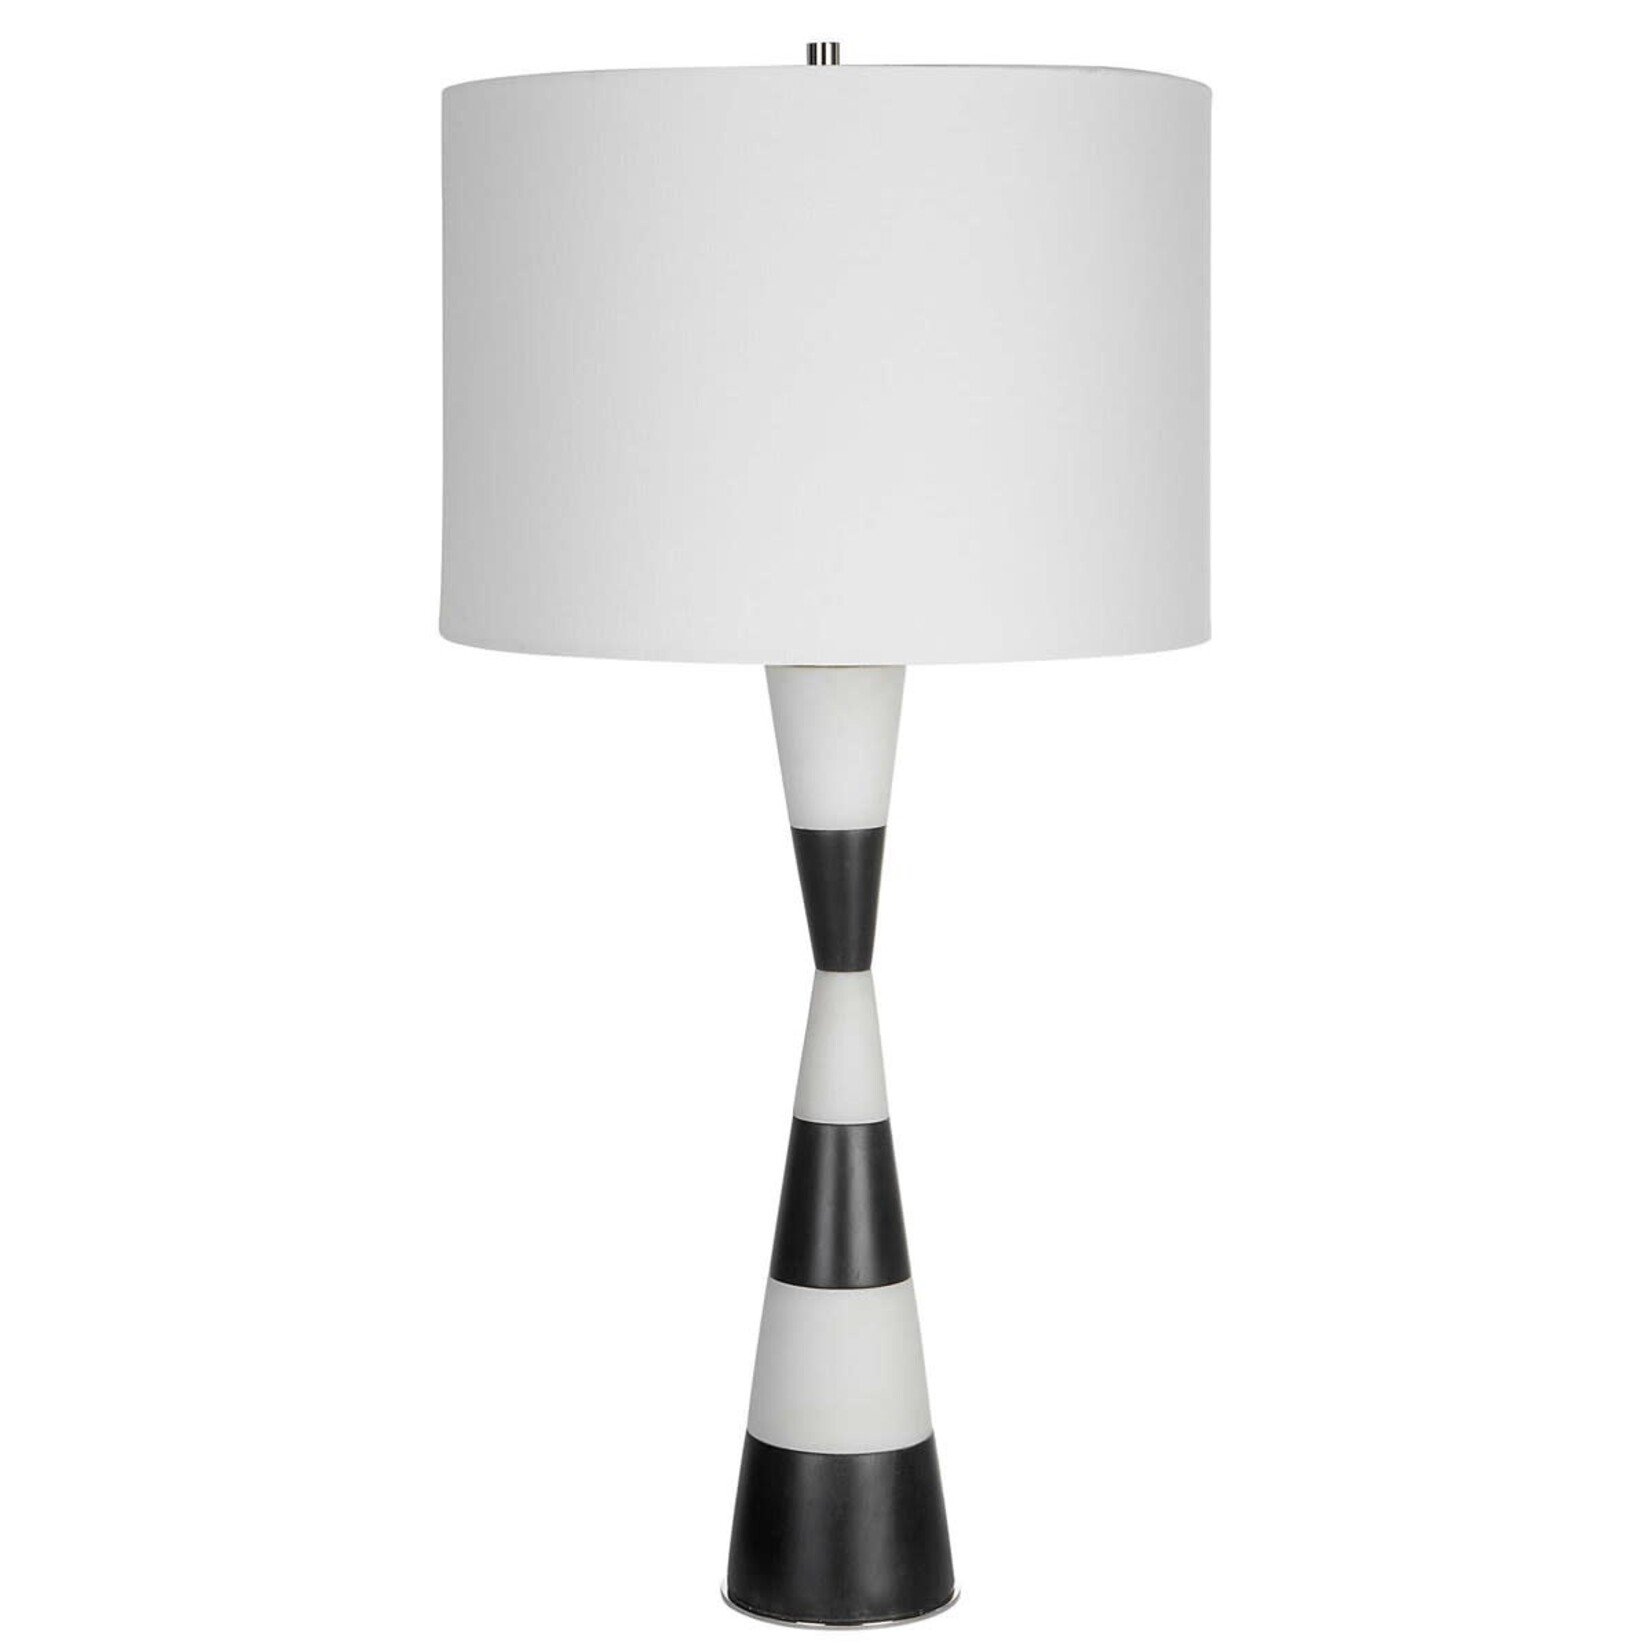 Outside The Box 30" Uttermost Bandeau Black & White Banded Man-Made Stone Table Lamp